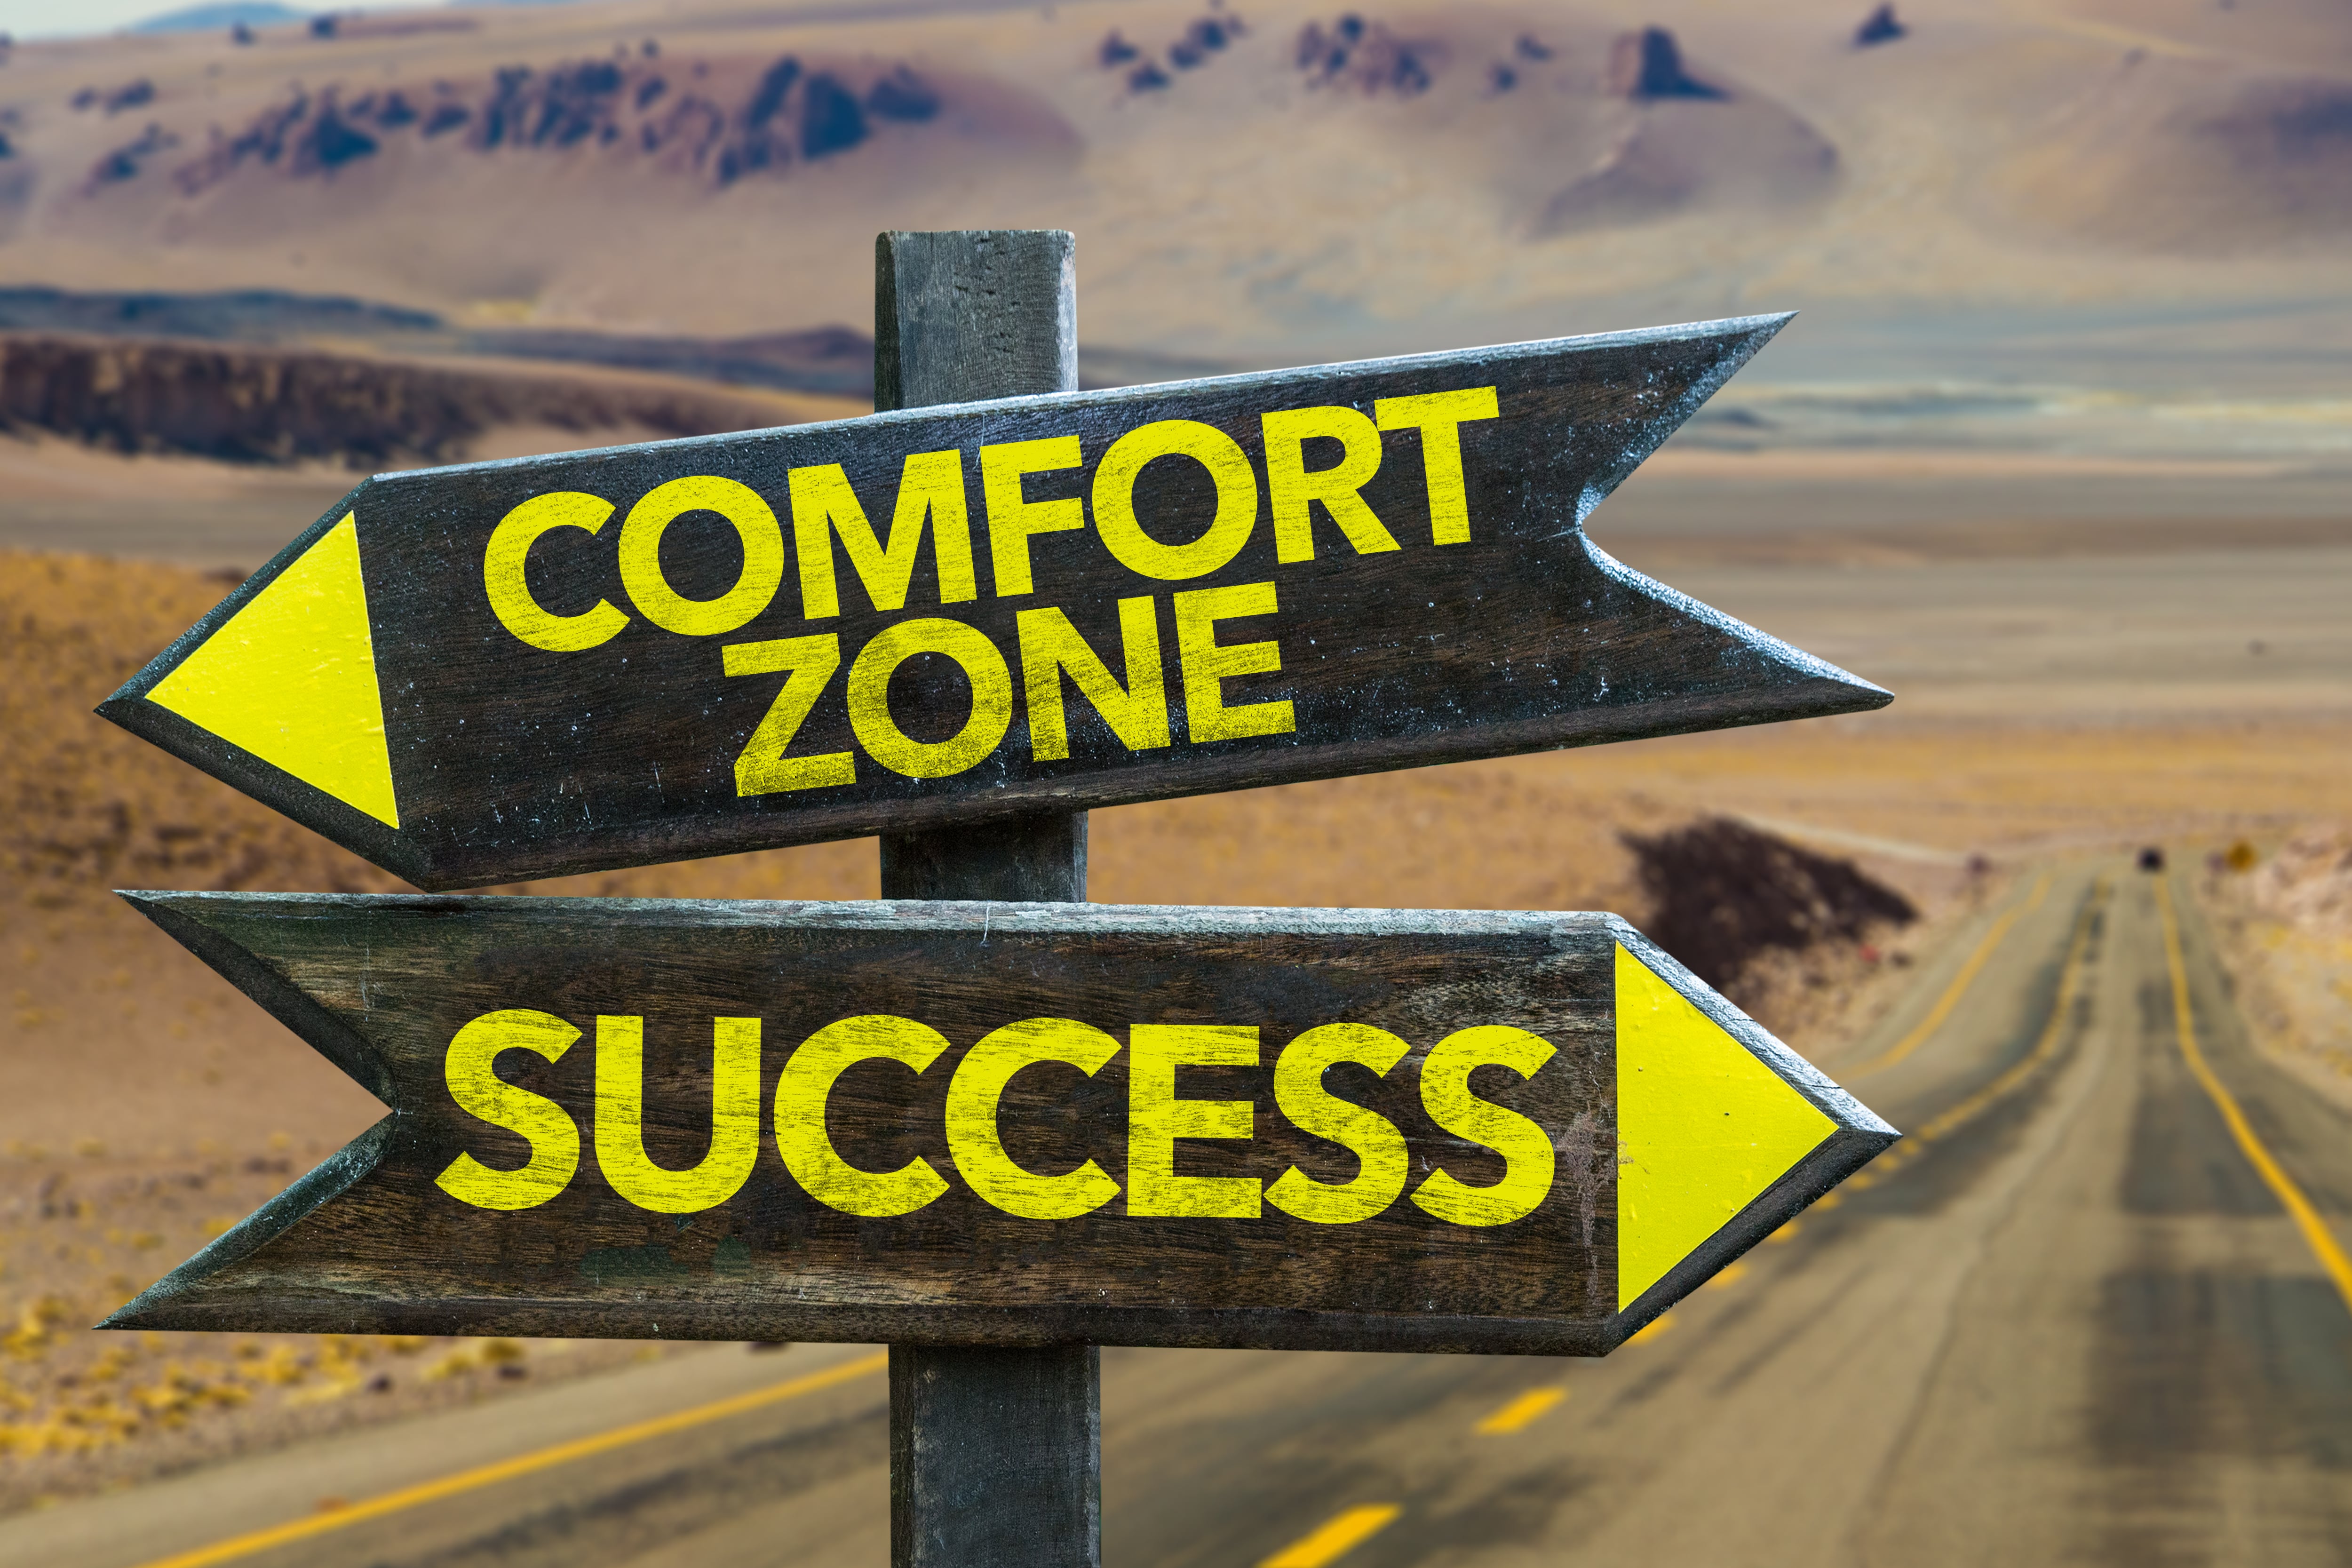 https://ohiobusinesscollege.edu/wp-content/uploads/2018/10/How-to-get-out-of-your-comfort-zone.jpg